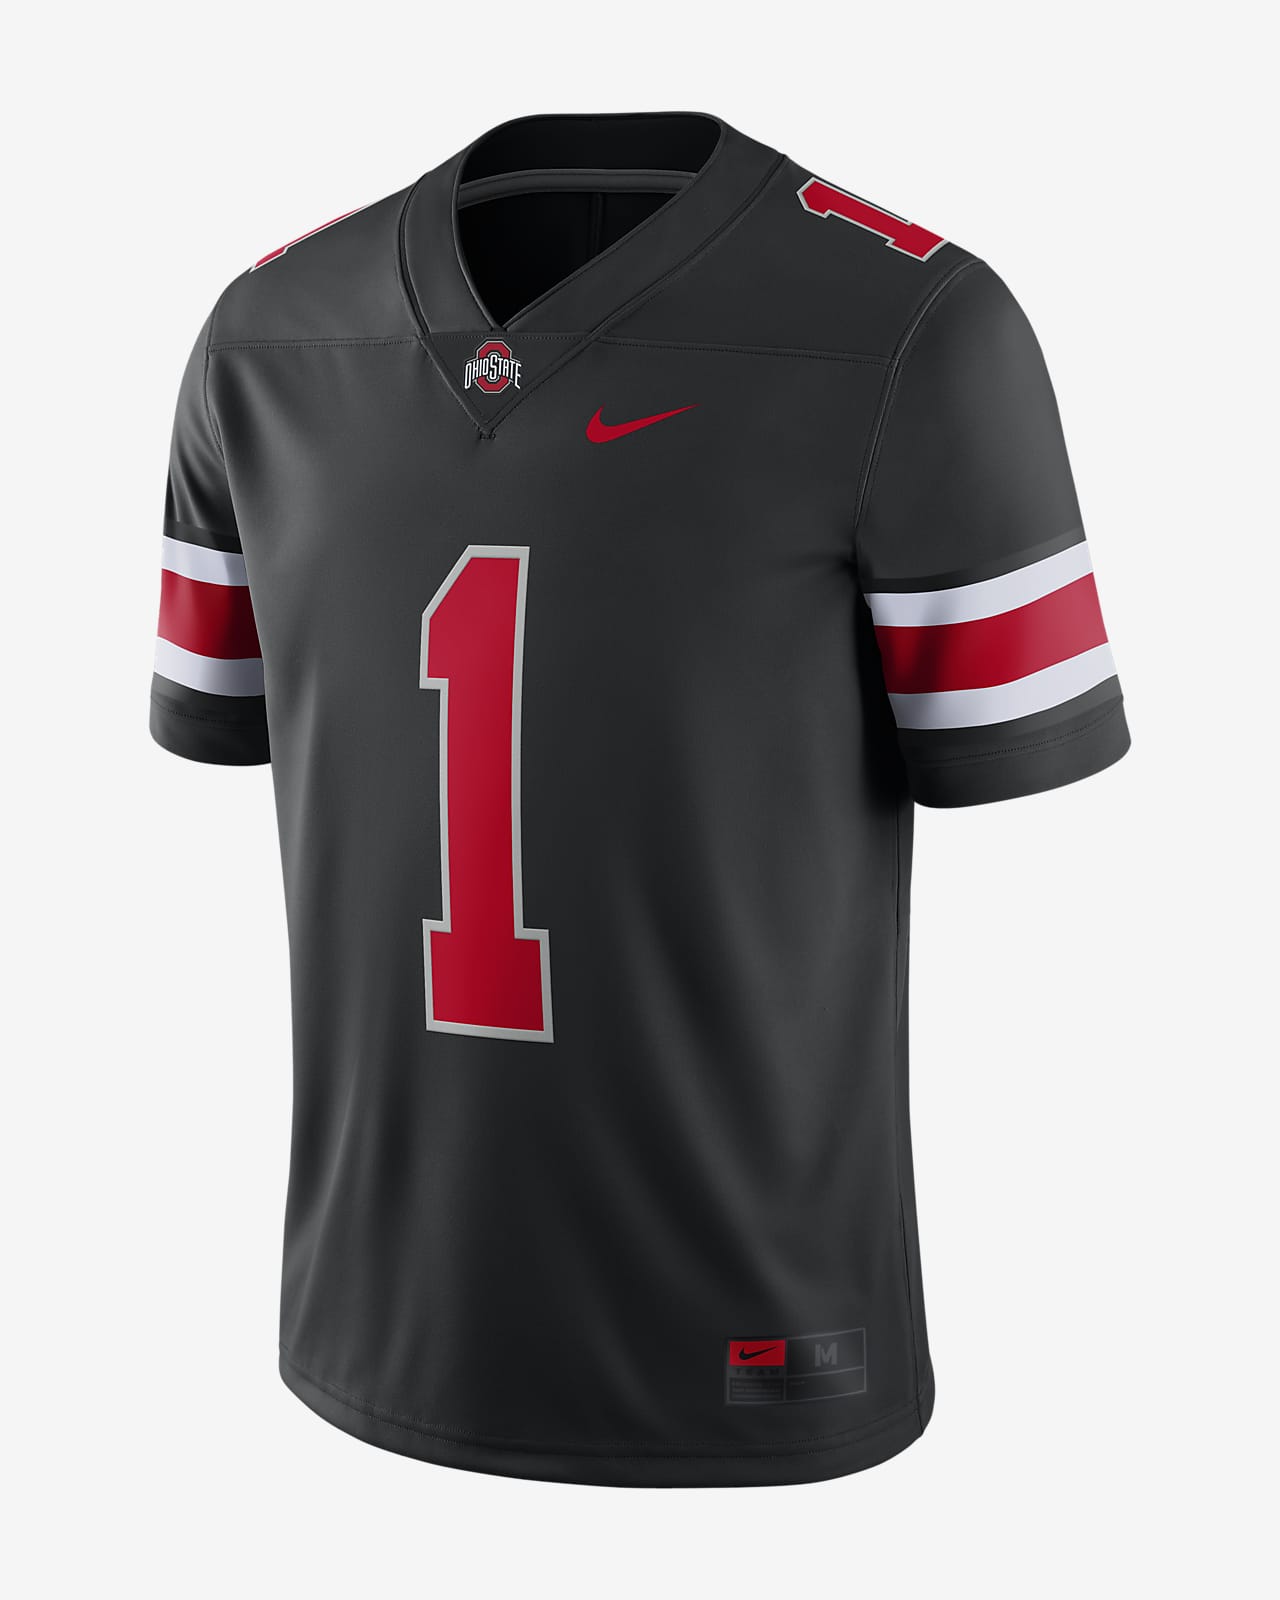 ohio state jersey for boys